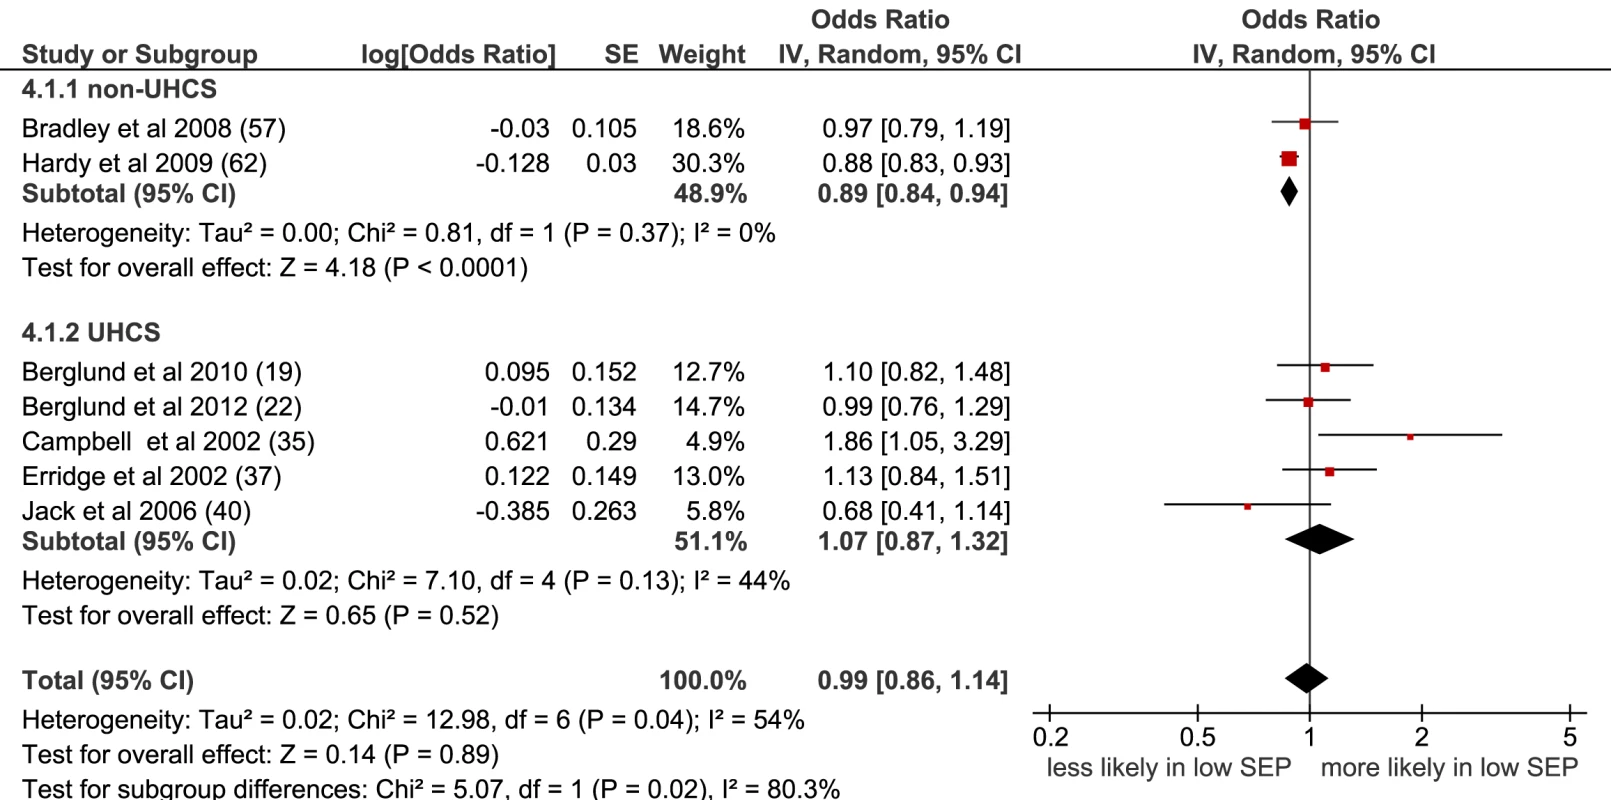 Meta-analysis of odds of receipt of radiotherapy in low versus high SEP.